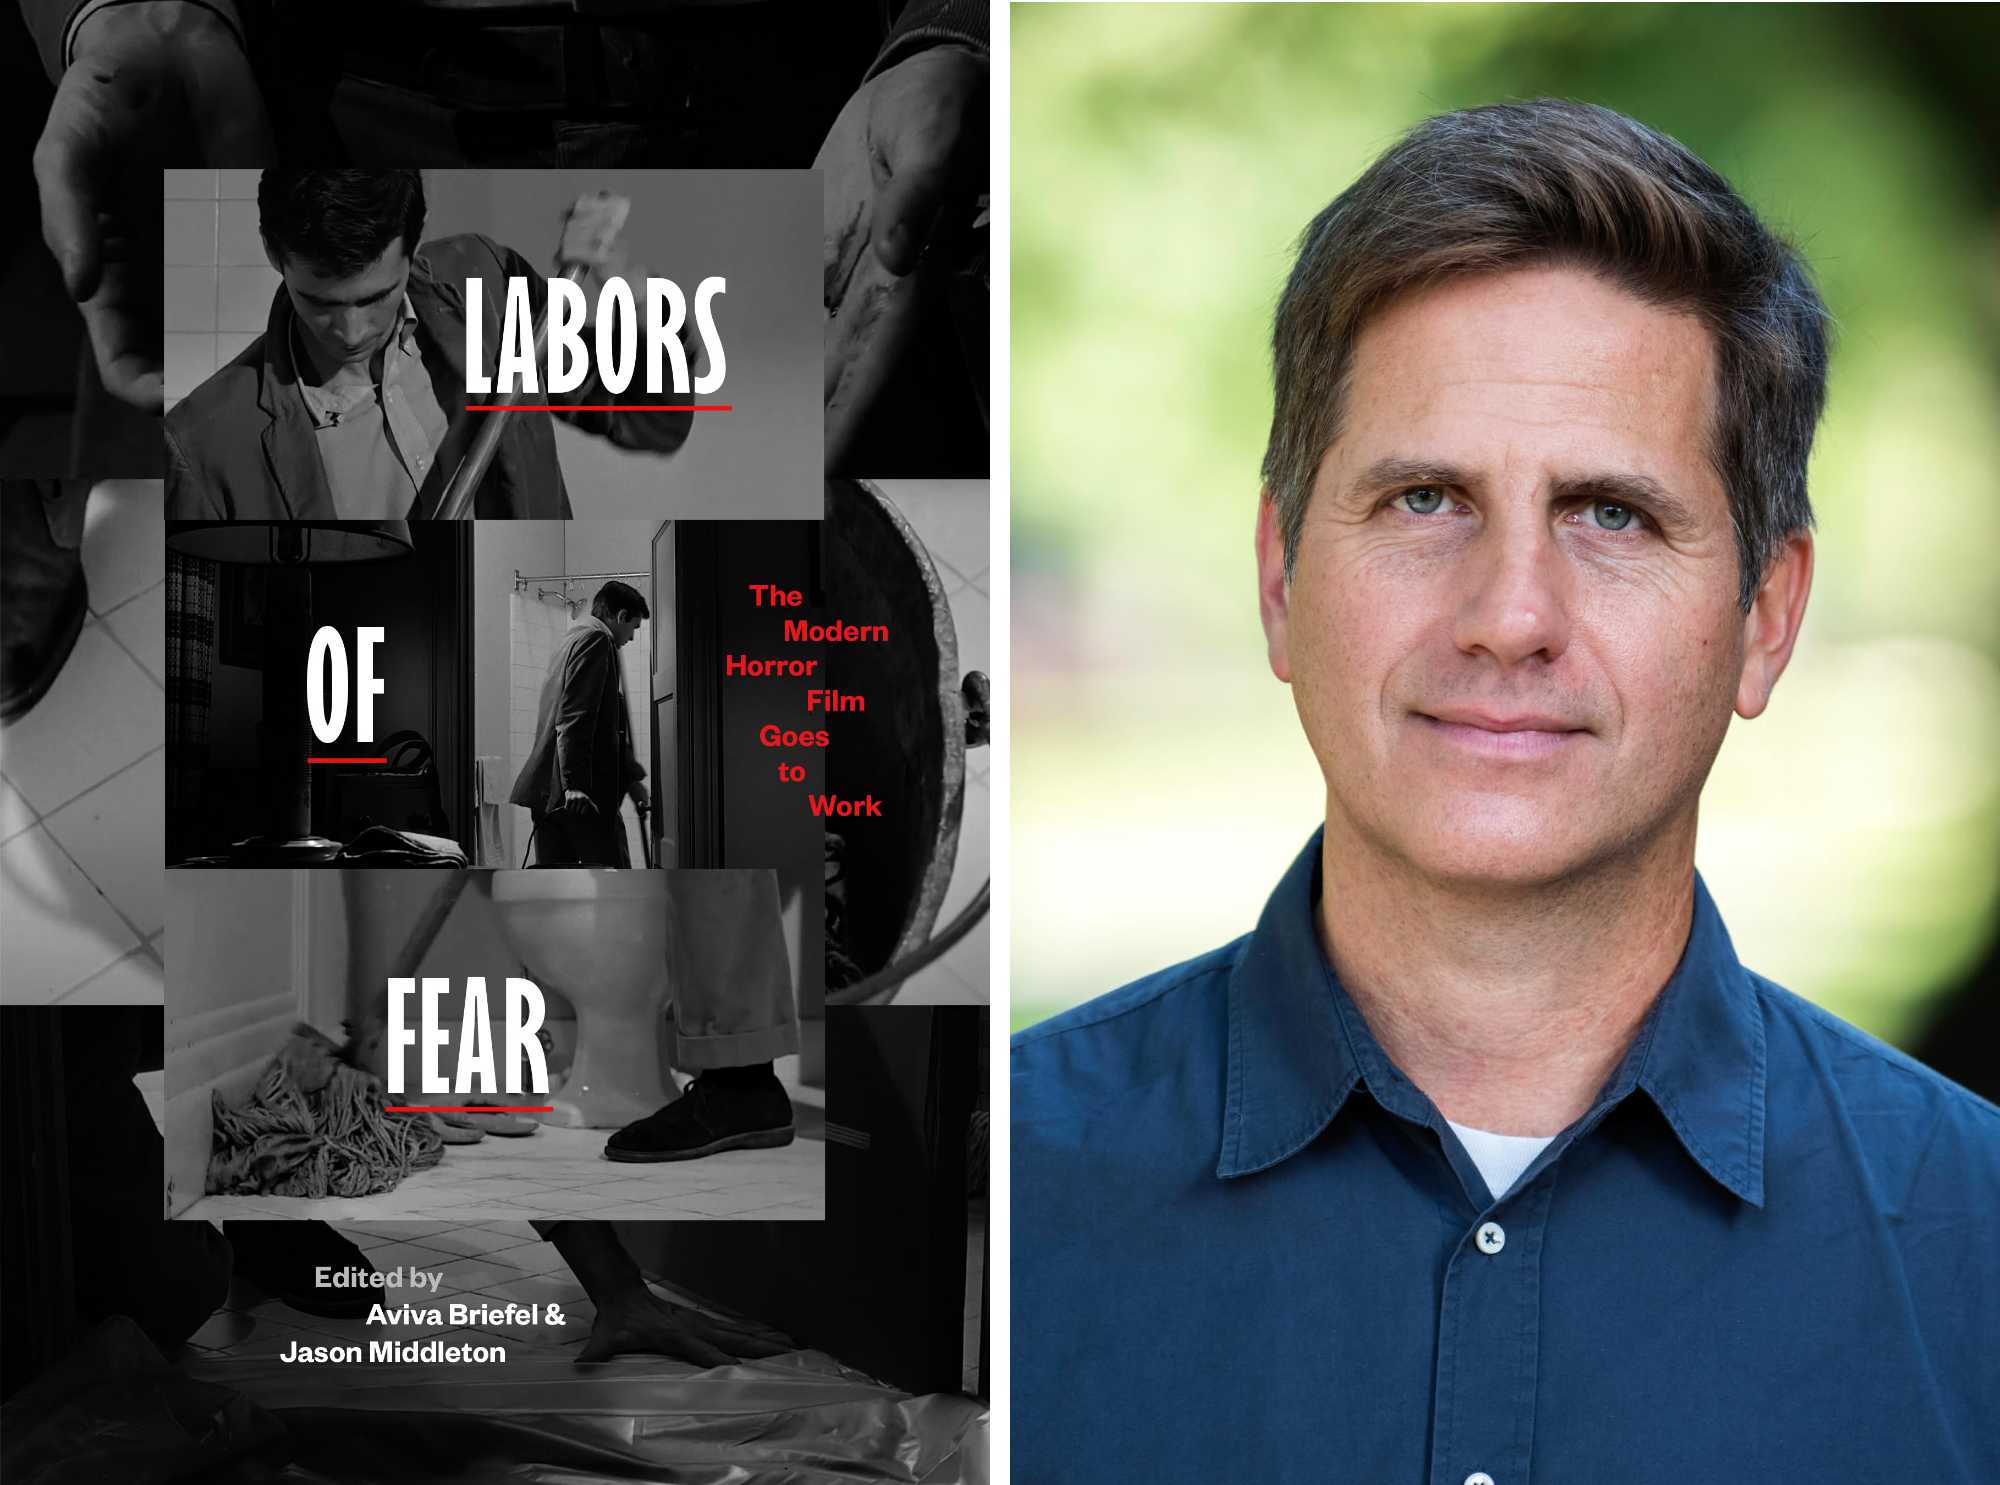 Diptych featuring the book cover art for "Labors of Fear: The Modern Horror Film Goes to Work" and an environmental portrait of coeditor Jason Middleton.